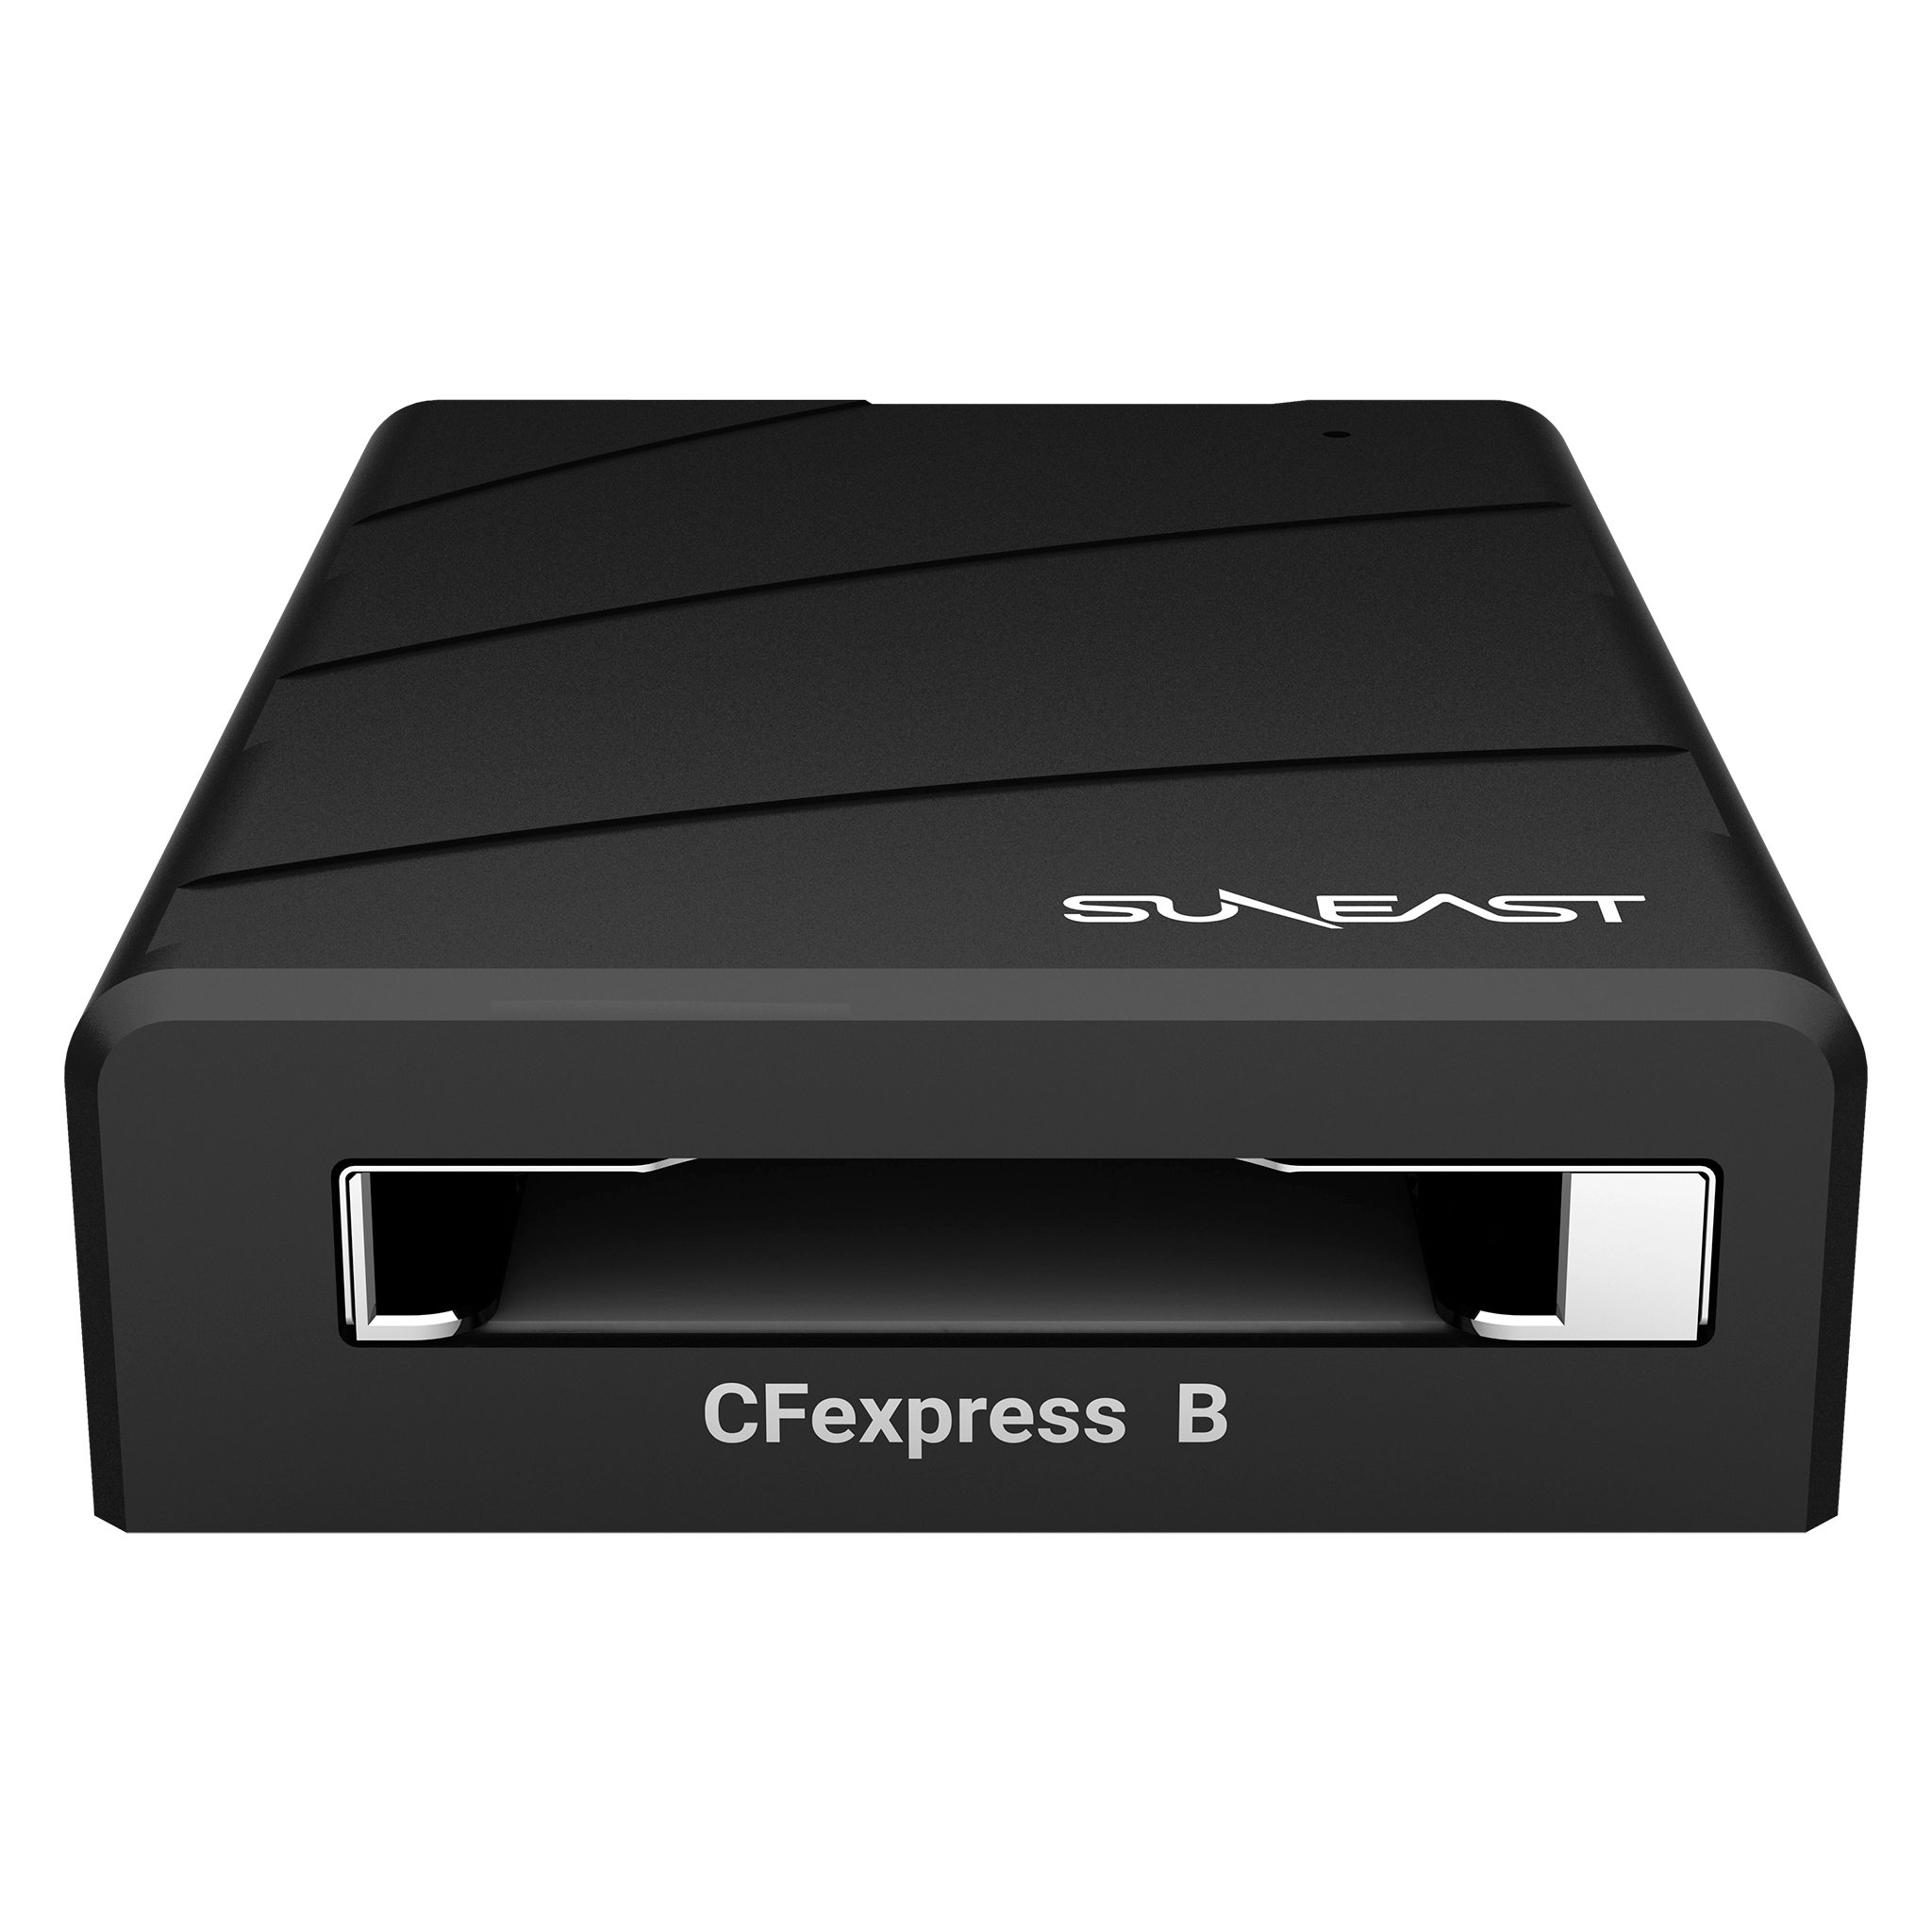 ULTIMATE PRO CFexpress TypeB カードリーダー - SUNEAST online store